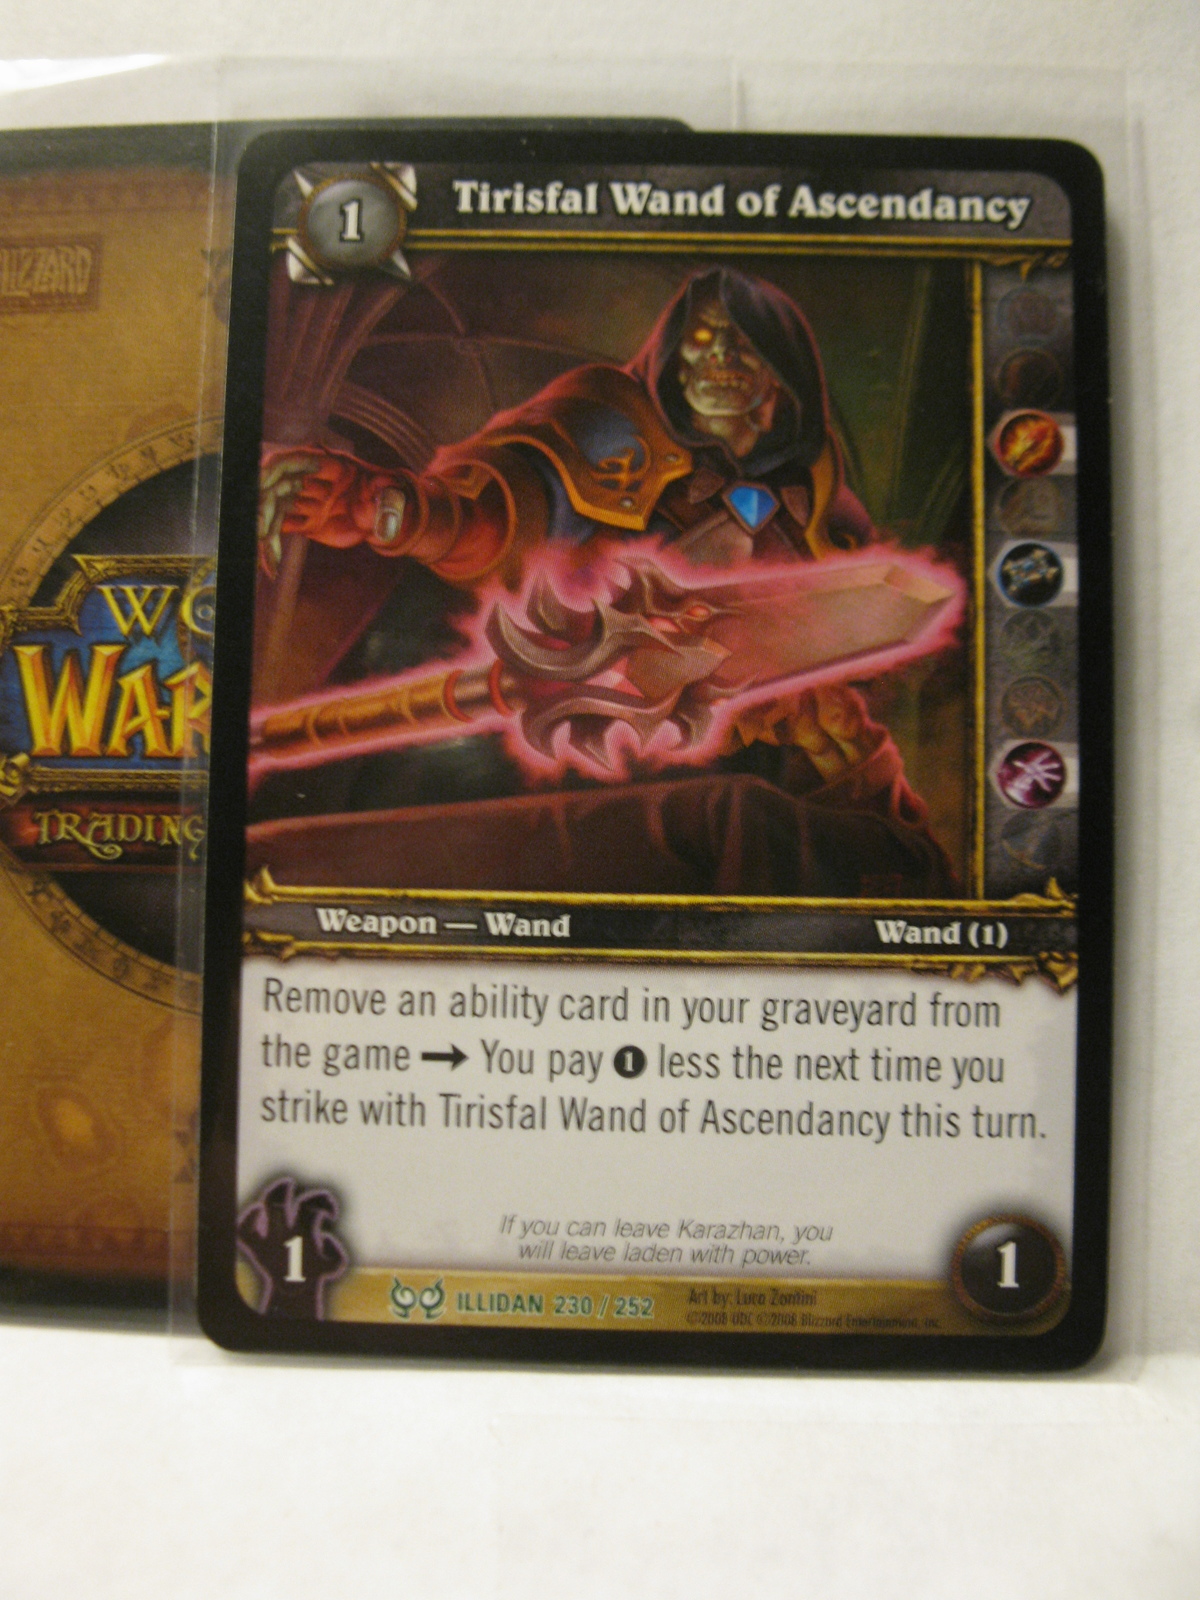 Primary image for (TC-1576) 2008 Warcraft Trading Card #230/252: Tirisfal Wand of Ascendancy